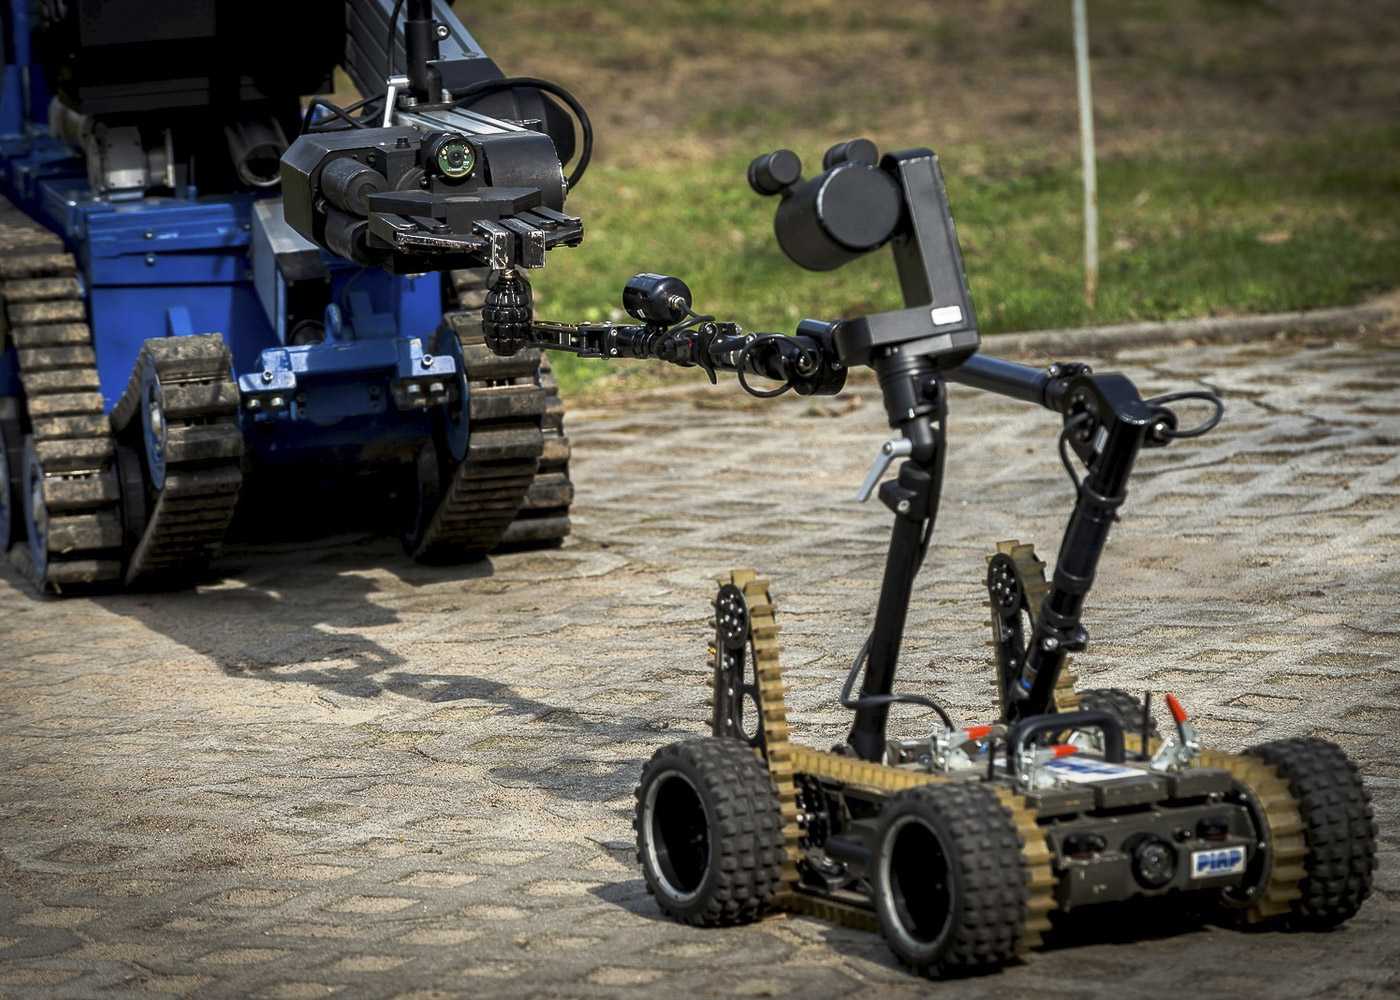 Two robots in collaboration